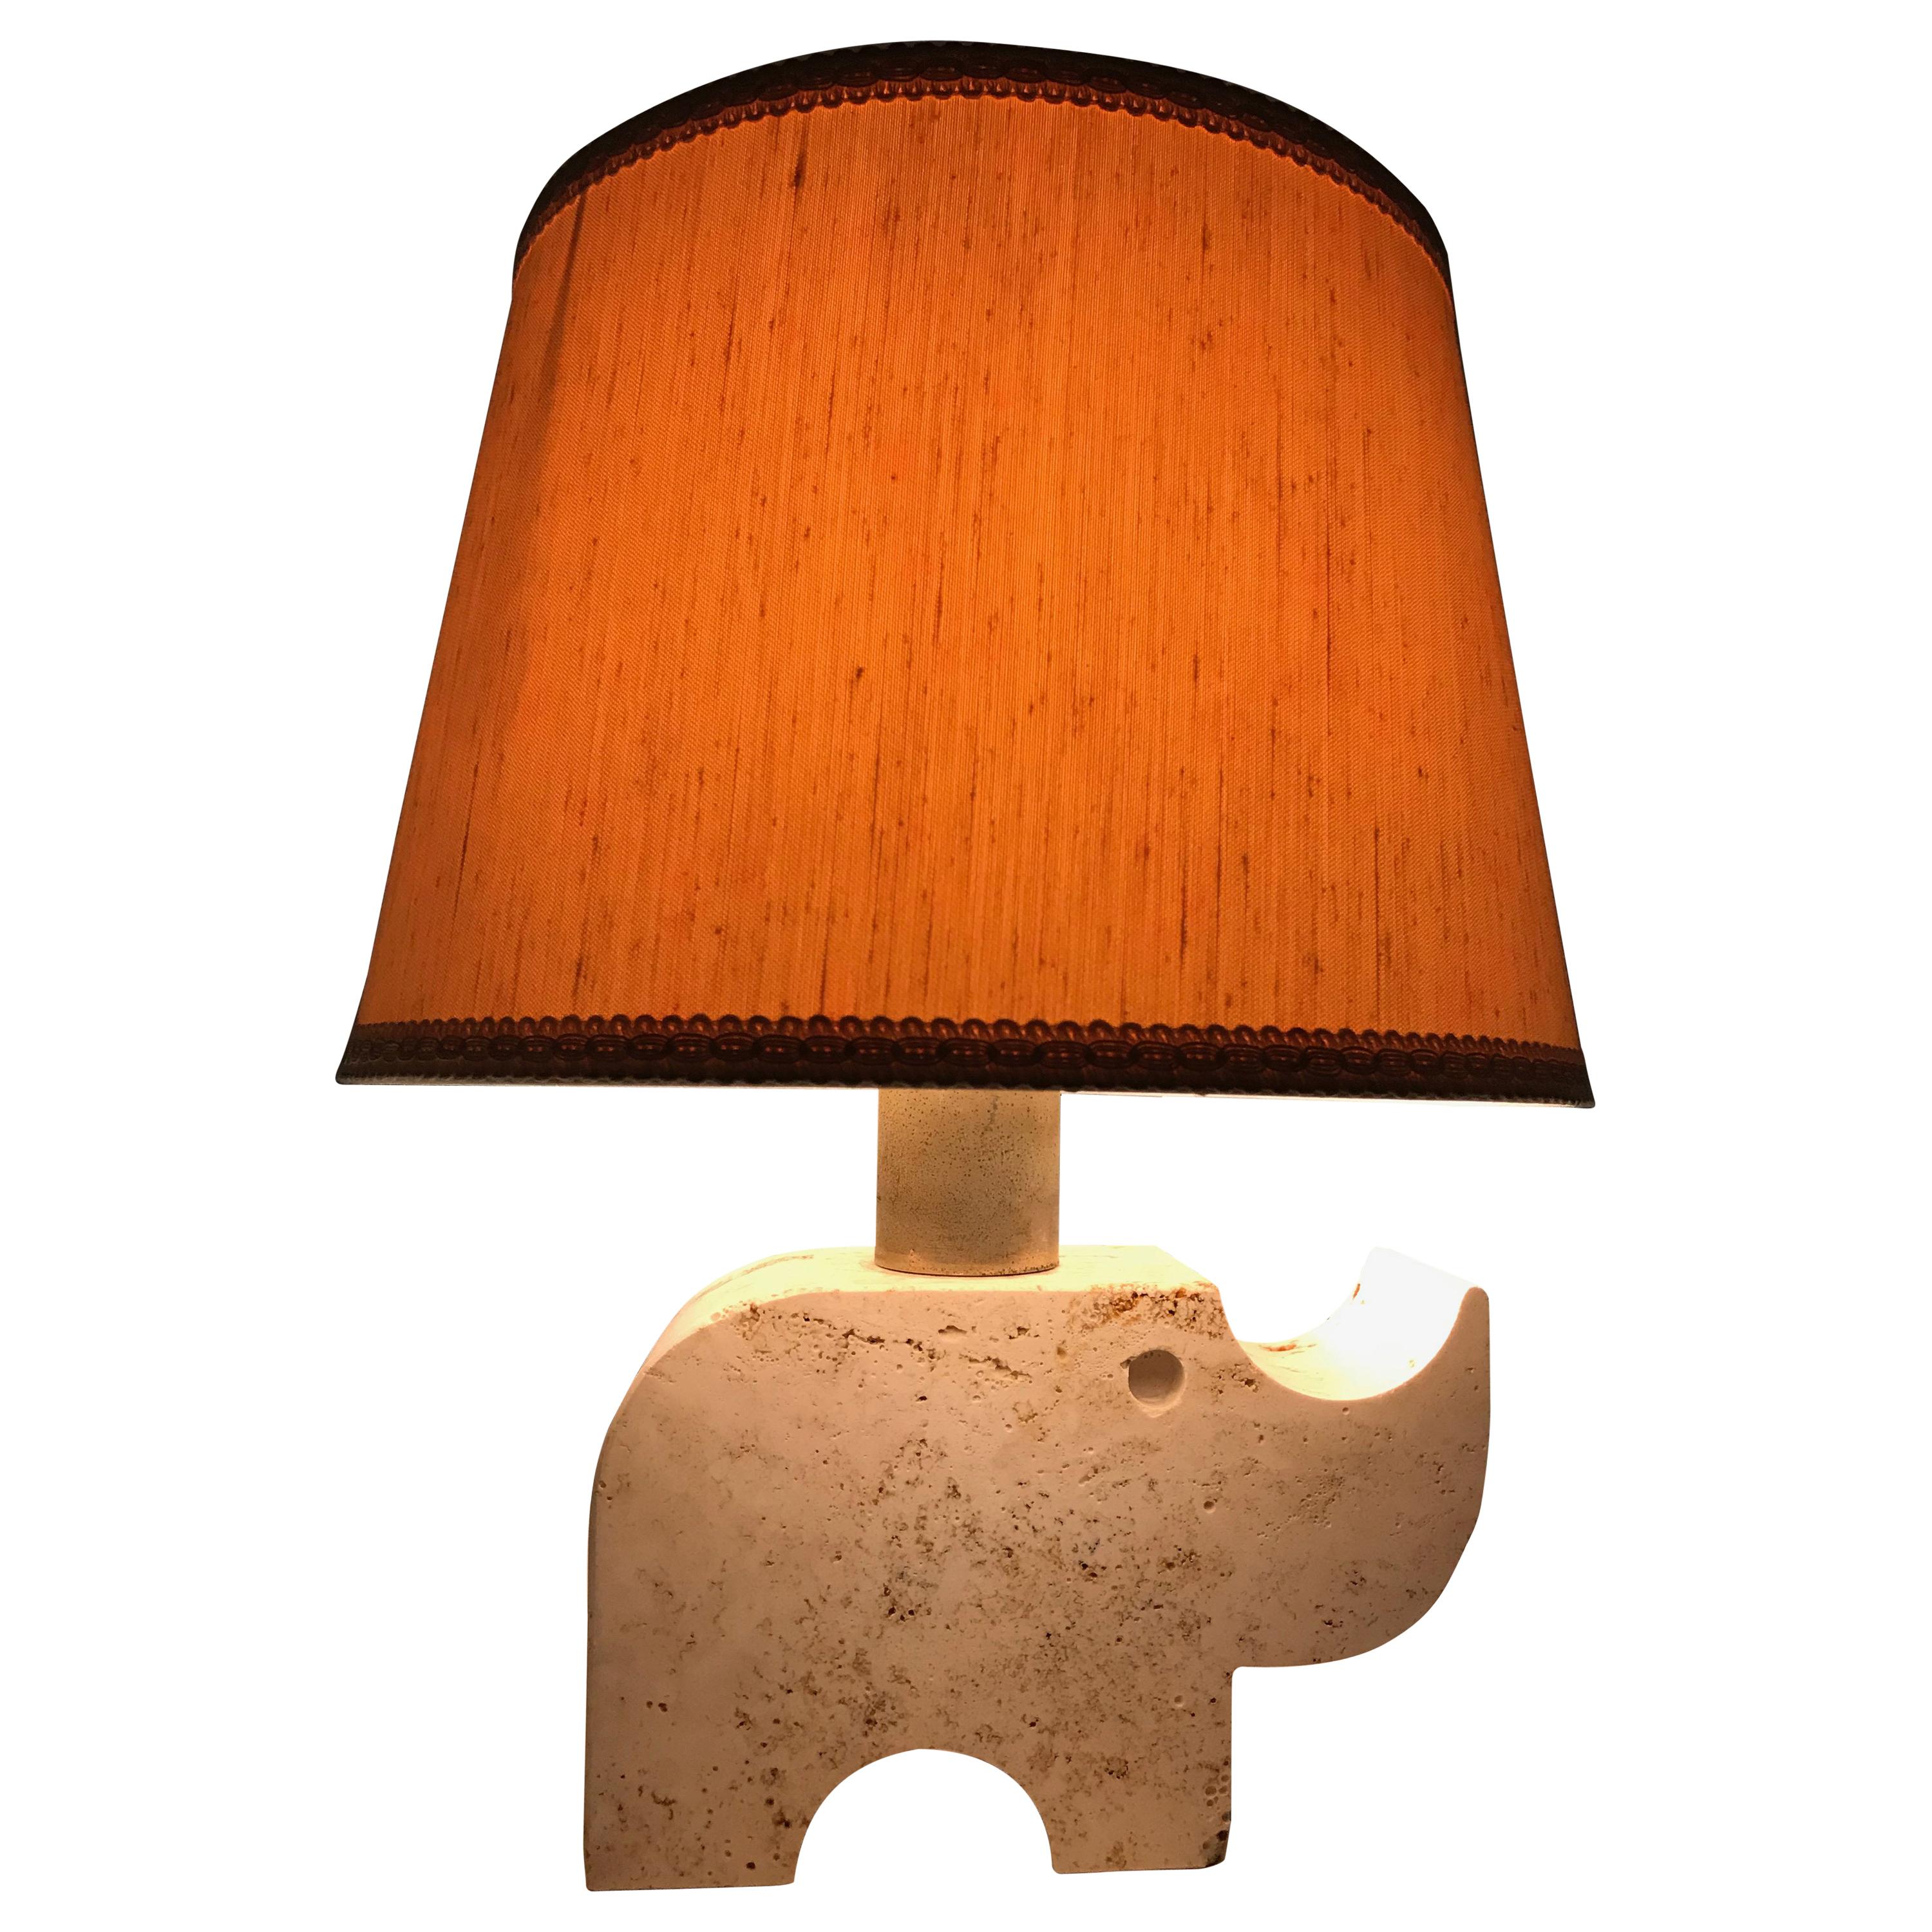 Table lamp in the shape of an rhinoceros in travertine produced by Fratelli Manelli in Italy, circa 1970s. Stem in chromed brass. Original cable Lampshade in customized linen included. It takes a bulb E27 100w at most.